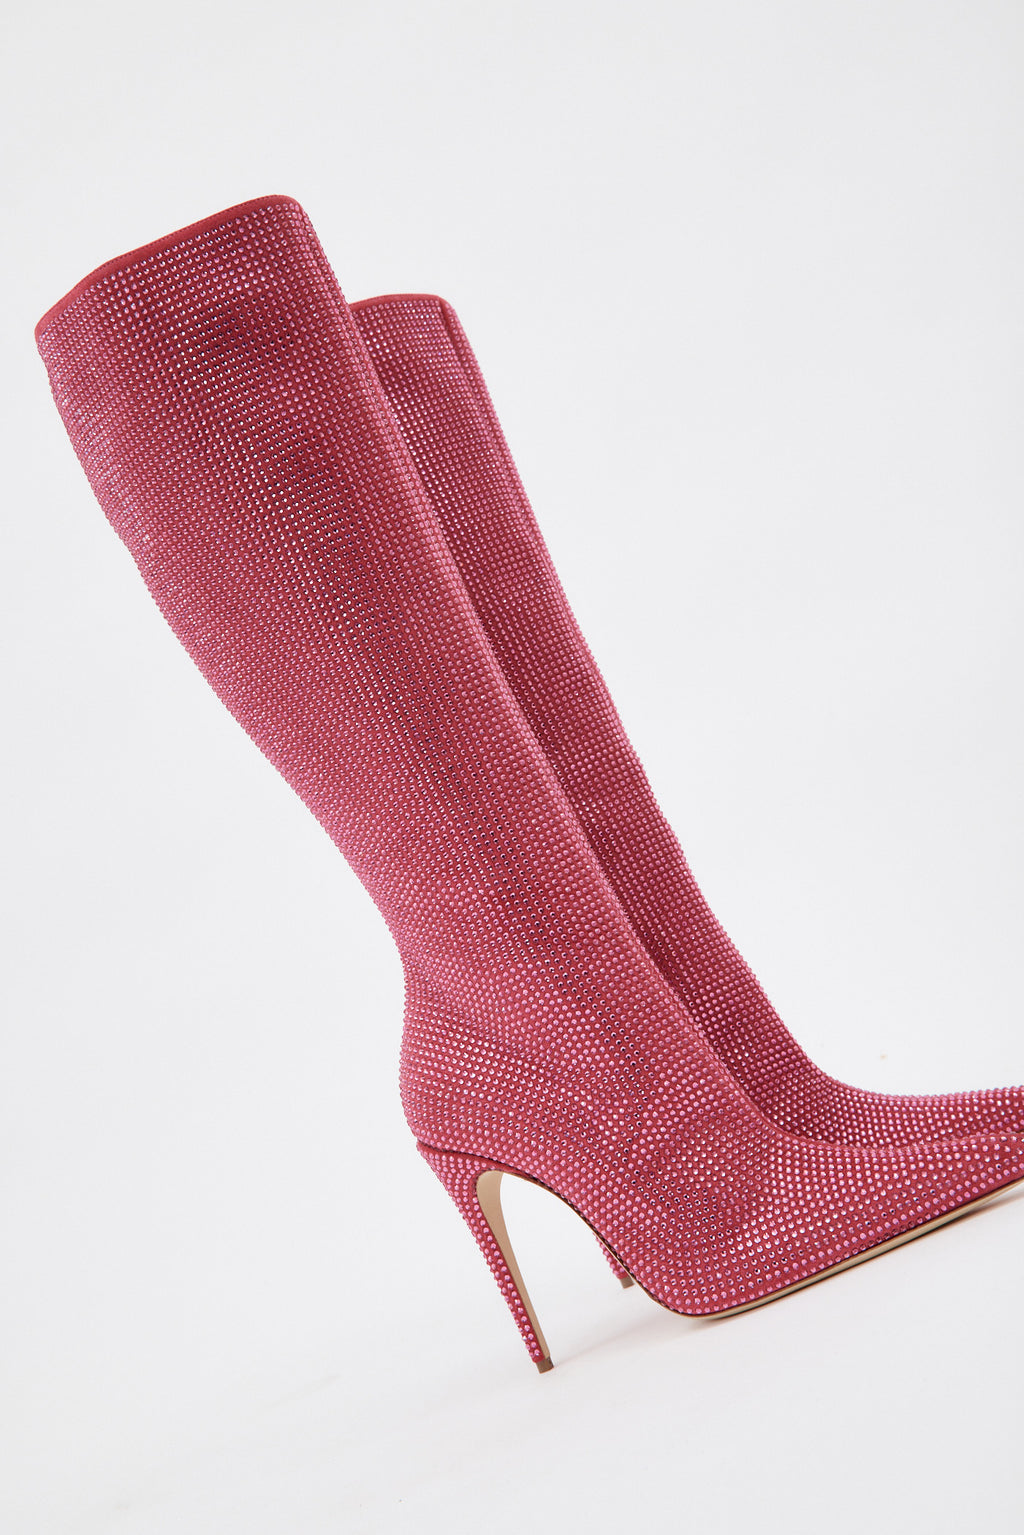 Tall Pointed Toe Pink Diamante Crystal Boots